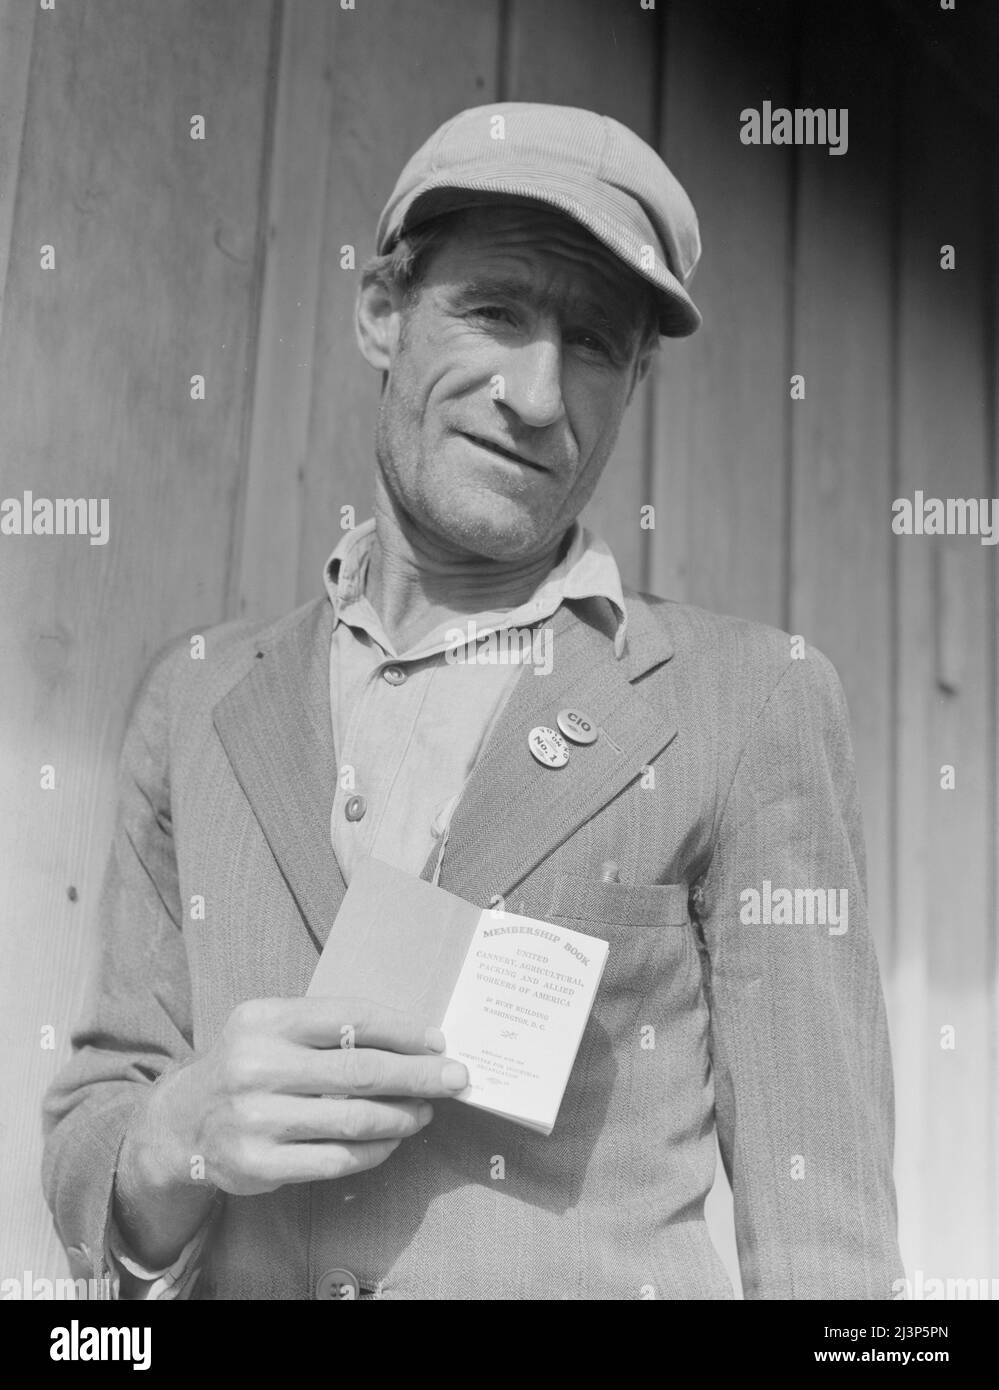 From Oklahoma farm (April 1938) to strike leader in California. Cotton strike (Nov. 1938). He displays his union membership book. &quot;Vote No on No. 1&quot; refers to proposed anti-picketing law which was later defeated by California electorate. Kern County, California. [He belongs to the United Cannery, Agricultural, Packing, and Allied Workers of America]. Stock Photo